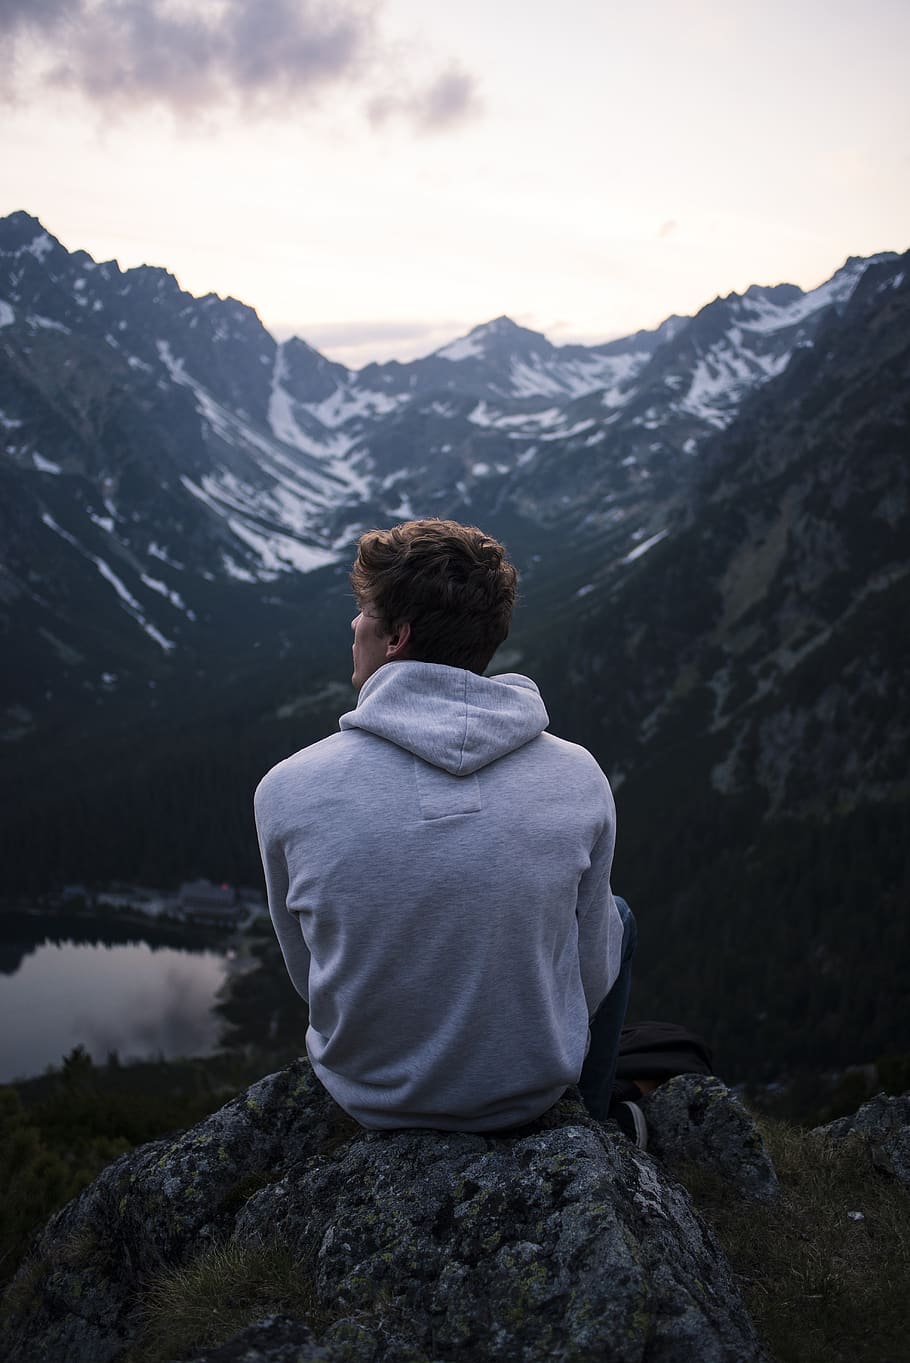 guy, man, male, people, back, contemplate, nature, mountains, travel, trek